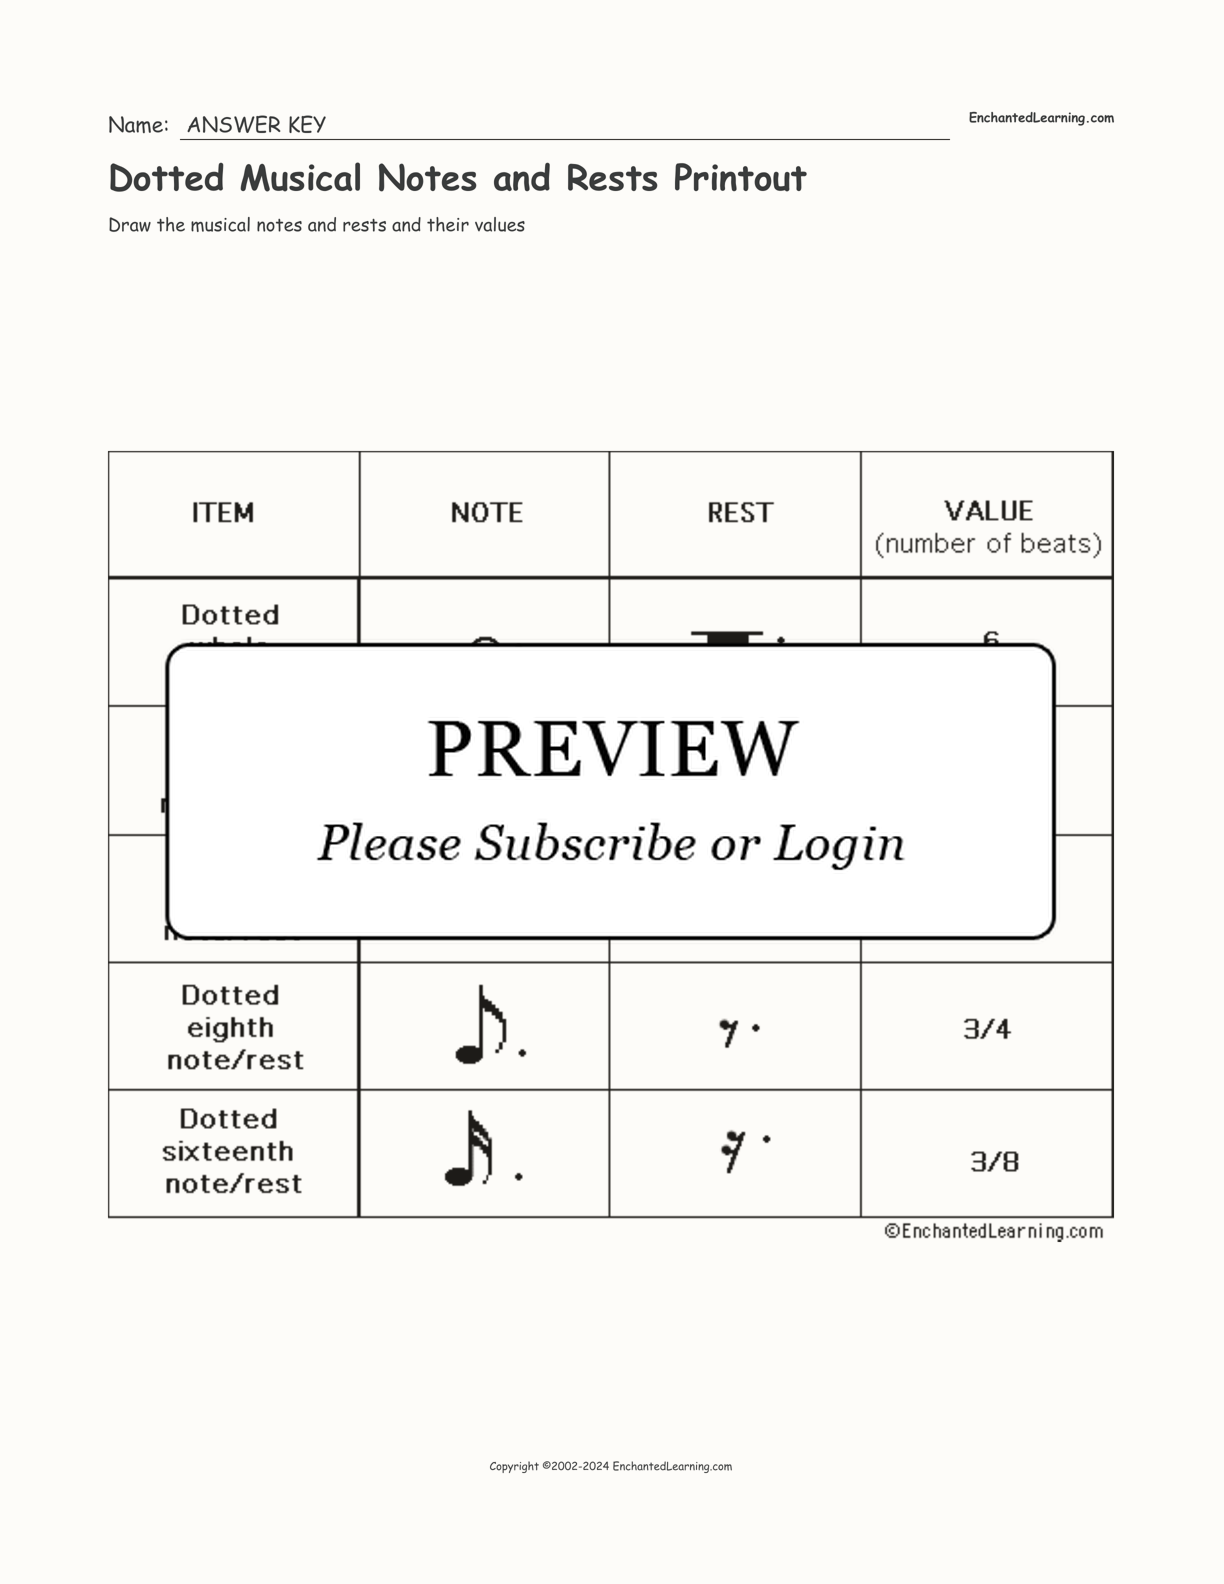 Dotted Musical Notes and Rests Printout interactive worksheet page 2